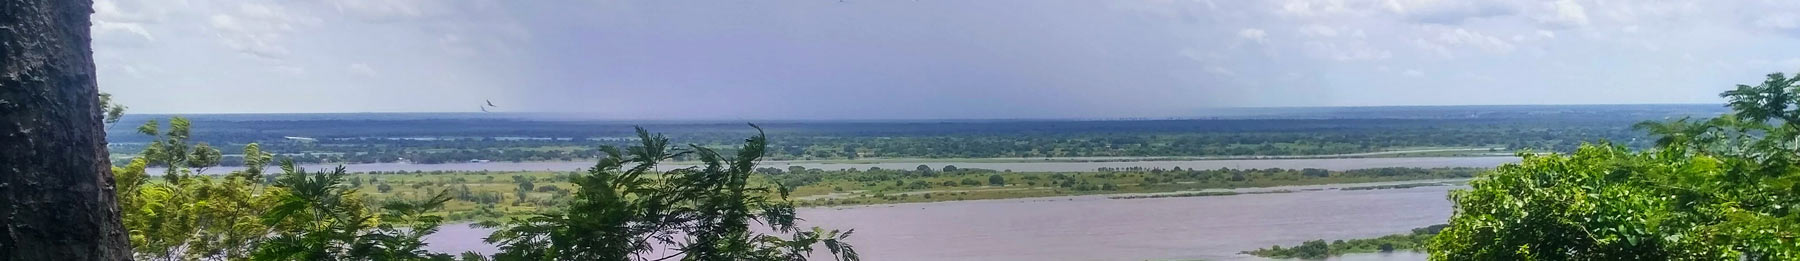 Paraguay River, view from Cerro Lambaré 